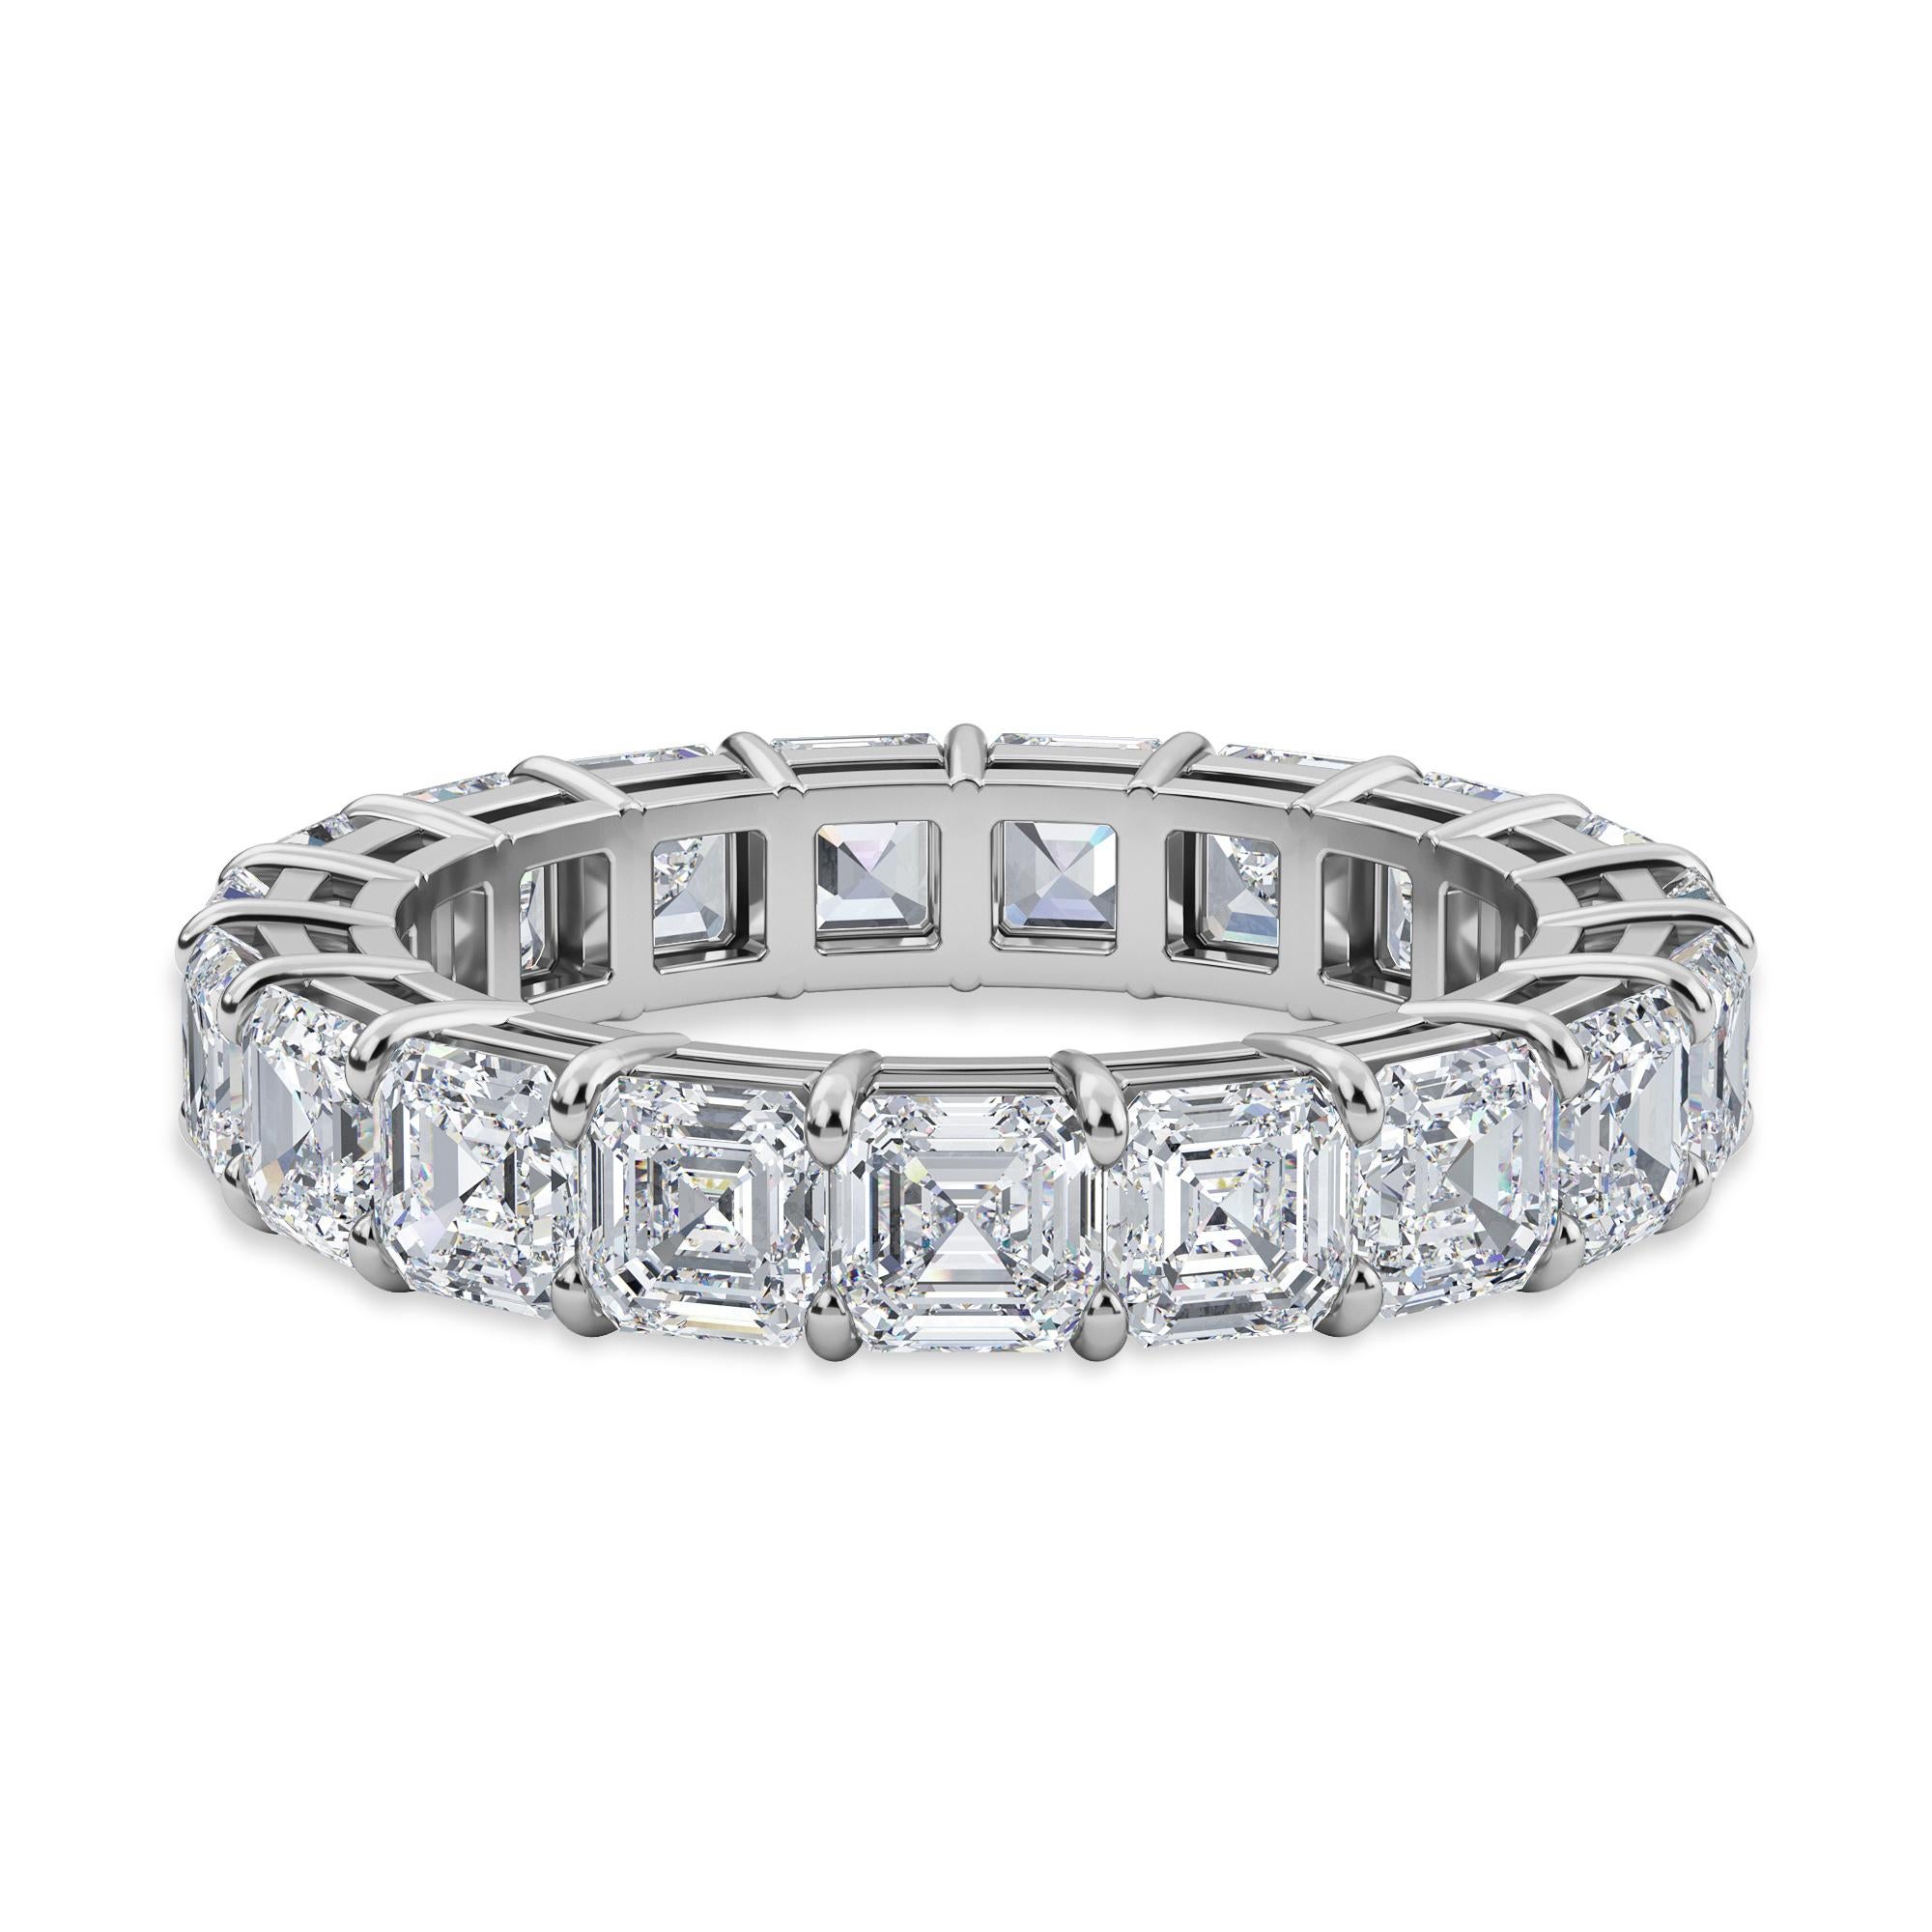 This Asscher Diamond Eternity Band features 19 Asscher Diamonds and weights 4.68 Total Carat Weight. Matched to perfection, these Asscher diamonds are F Color and VS Clarity, set in Platinum in a finger size 6.5. 